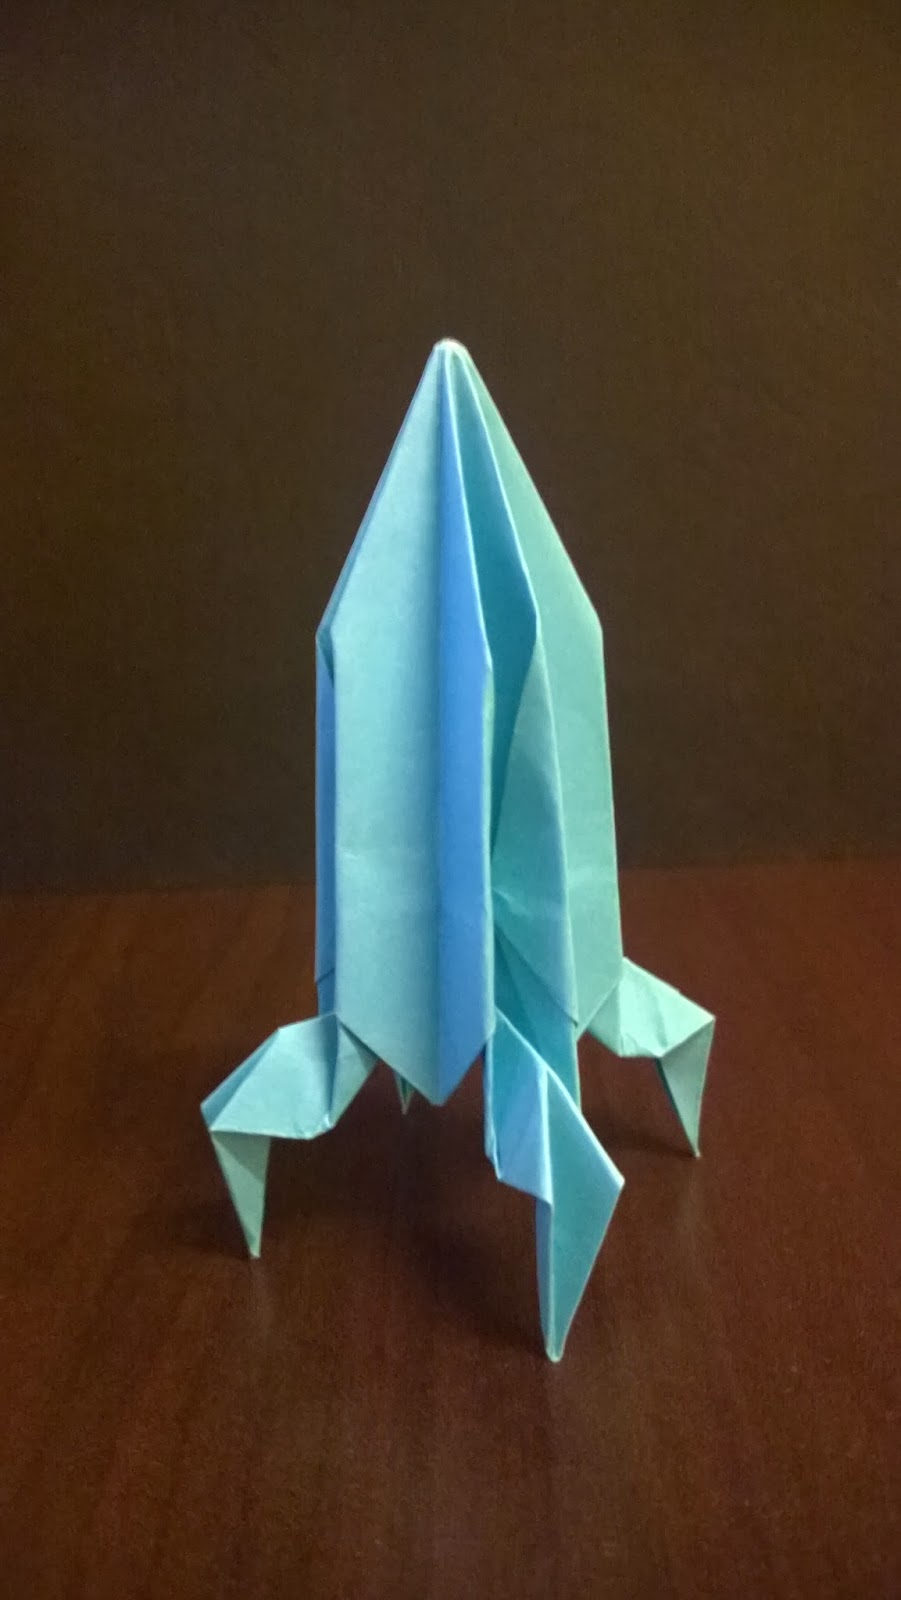 How To Make Origami Rocket Yoshinys Design How To Fold An Origami Rocket